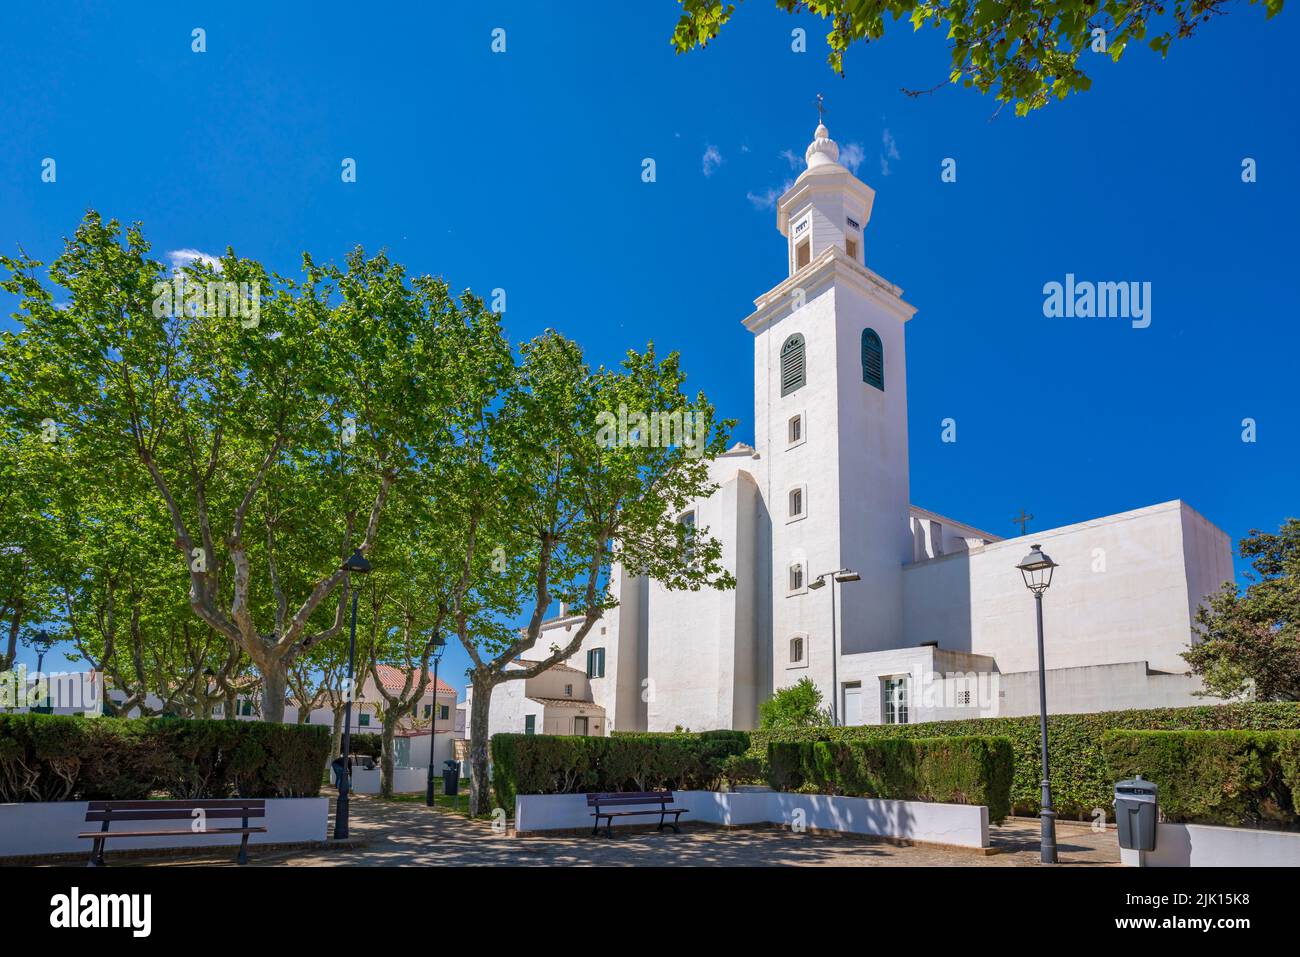 View of whitewashed Catholic Church framed by trees against blue sky, Sant Lluis, Menorca, Balearic Islands, Spain, Mediterranean, Europe Stock Photo